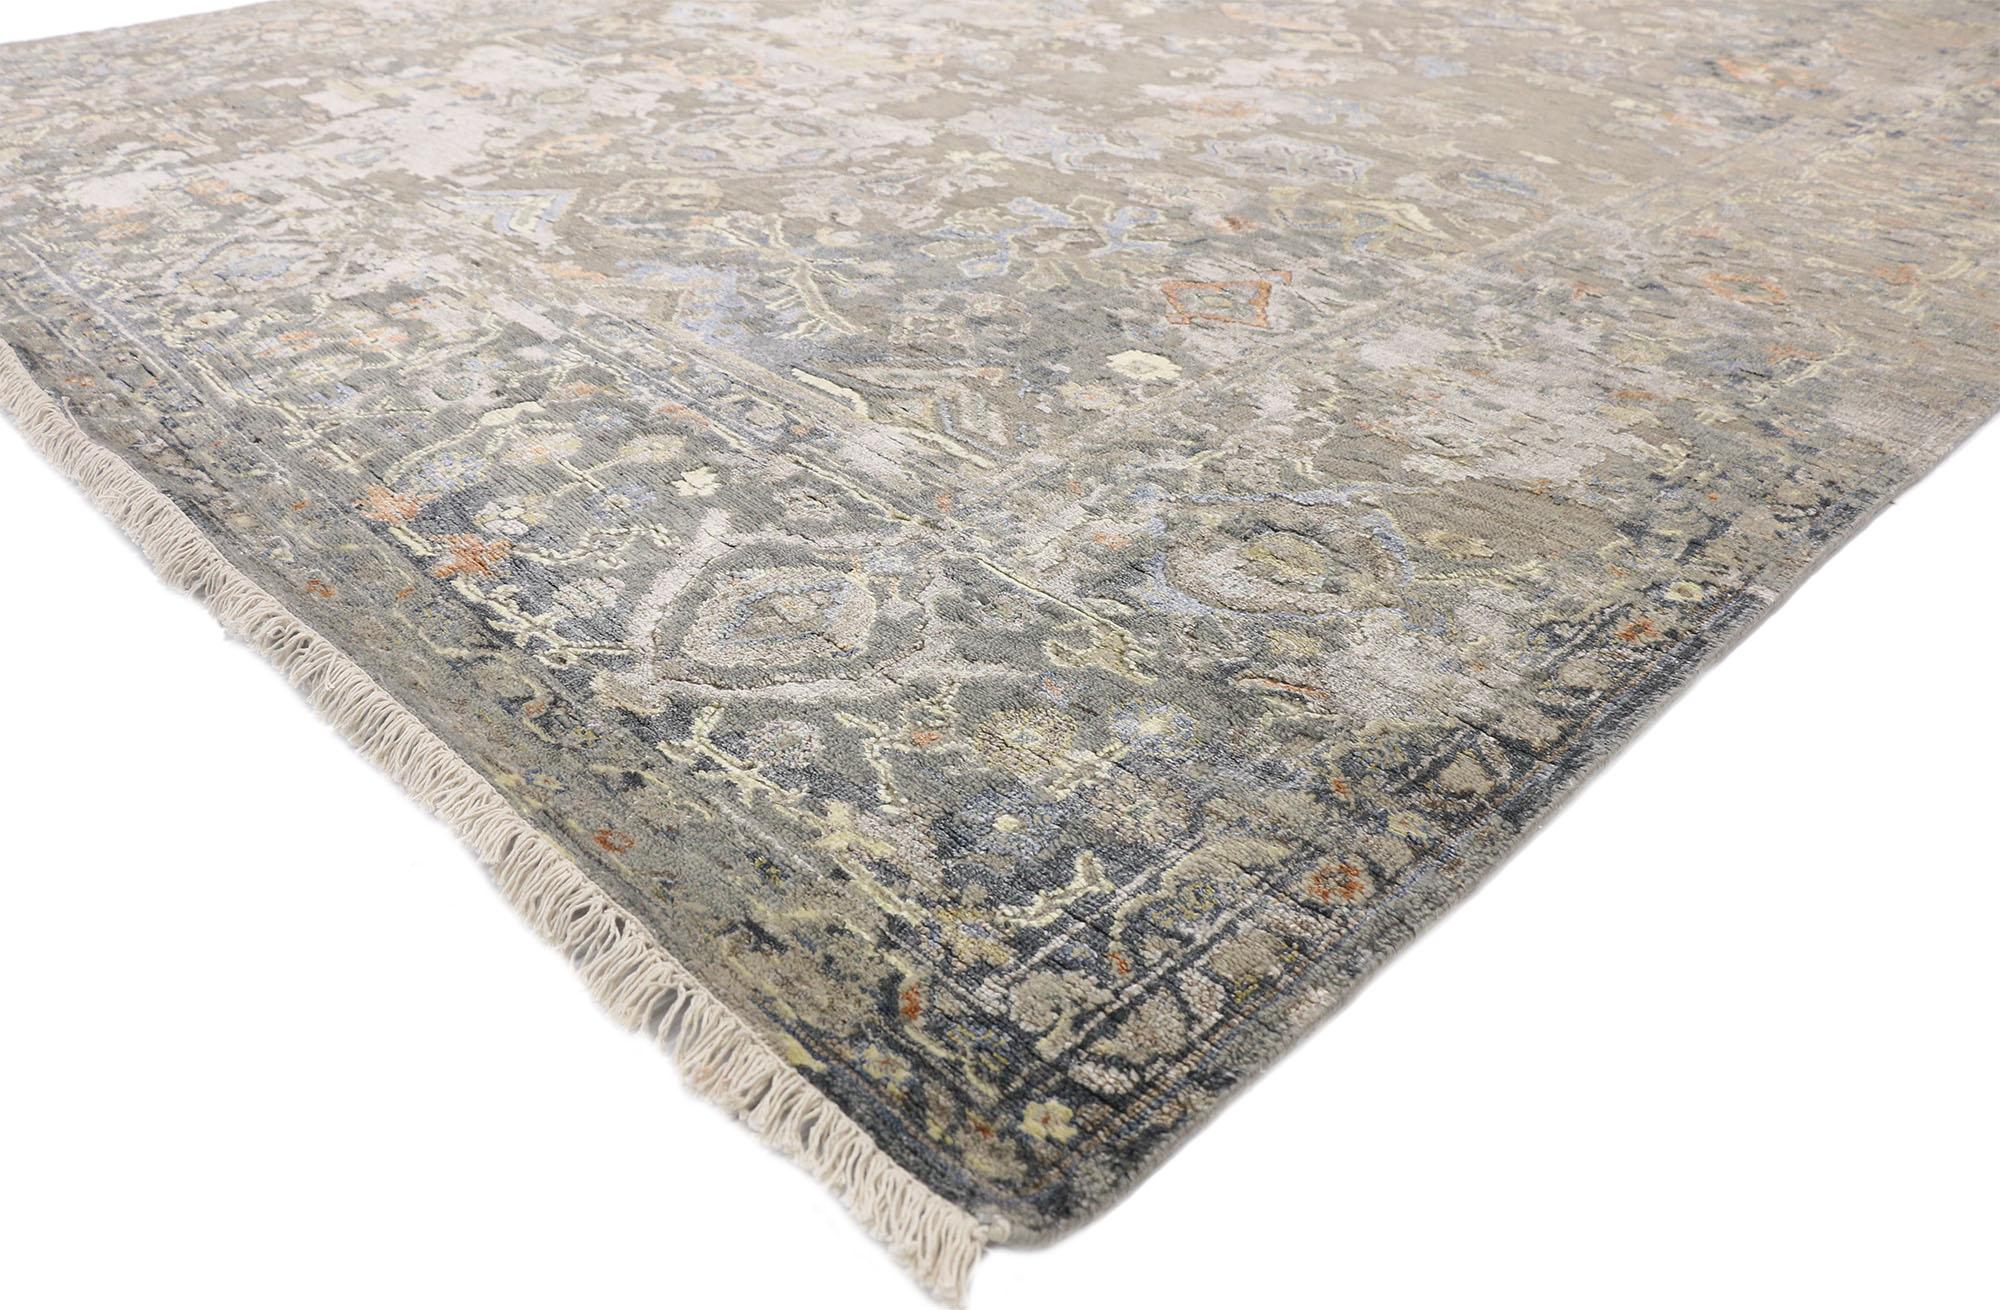 30405, transitional area rug with Oushak pattern and chinoiserie style. Among the most coveted by style houses, contemporary Oushak Rugs embody relaxed elegance in soft neutral, pastel colors. This transitional area rug with a traditional Oushak